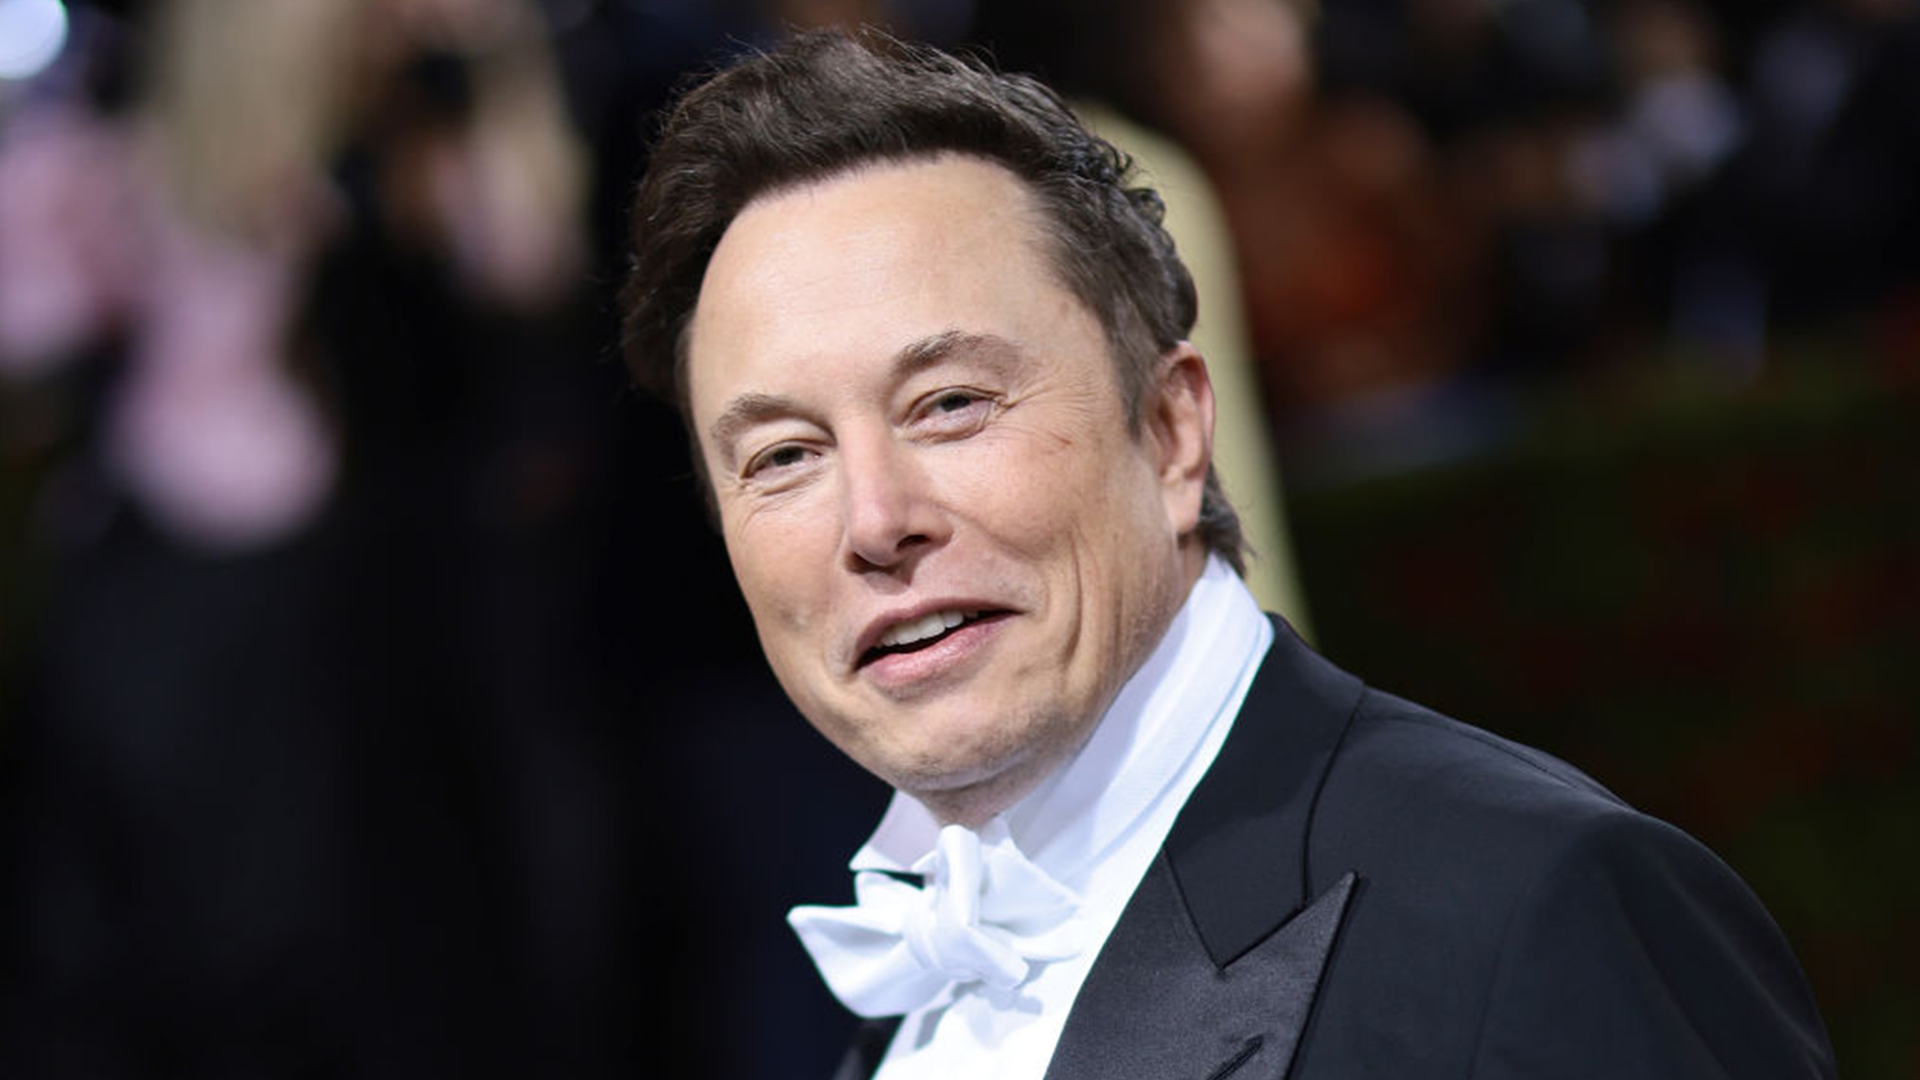 Elon Musk Faces $258B Lawsuit For Alleged Dogecoin 'Pyramid Scheme'